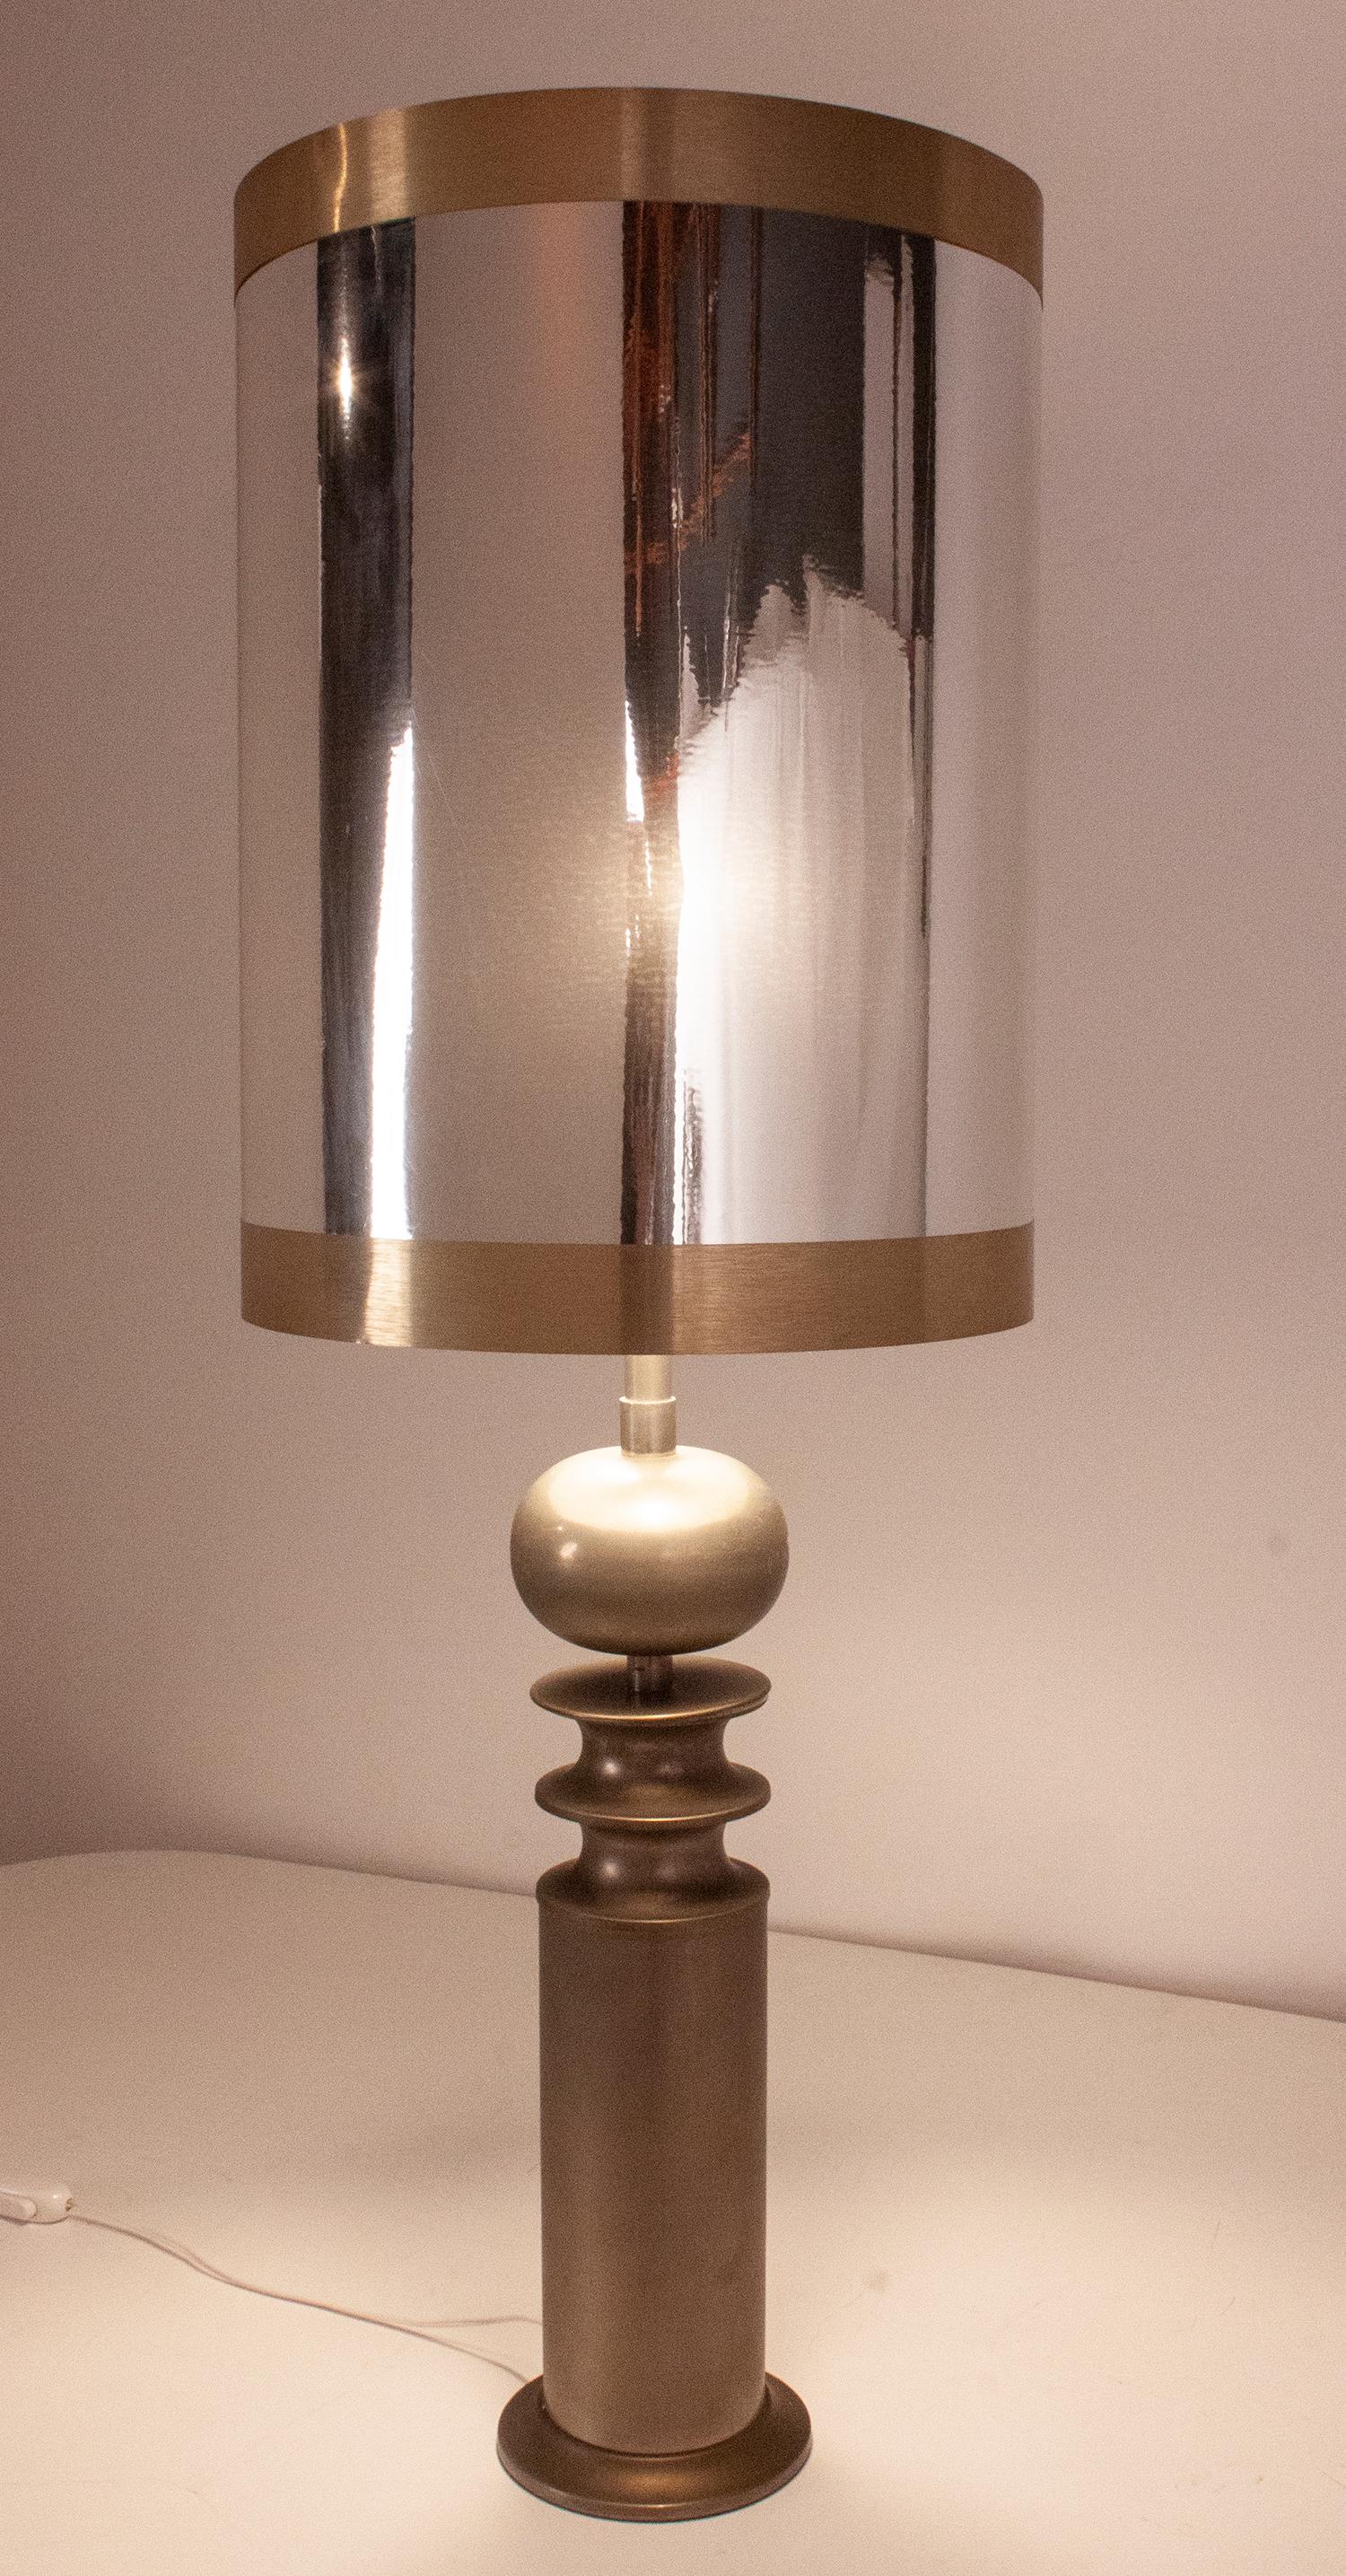 Large metal table lamp, Spain 1970's.
New shade (just like the original) with its original support. The lamp has three bulbs
European plug.